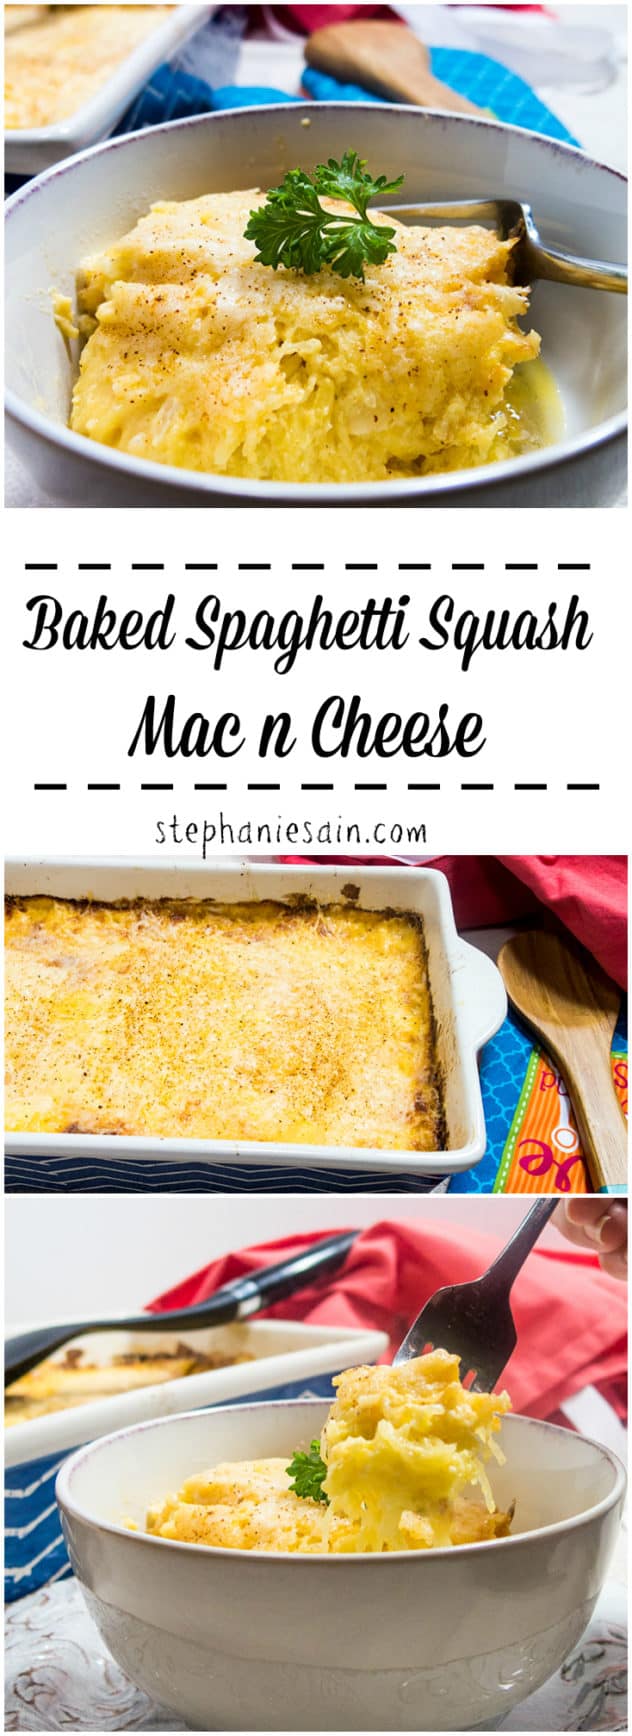 Baked Spaghetti Squash Mac n Cheese is a healthier, tasty option for an age old favorite dish. Vegetarian and Gluten Free.